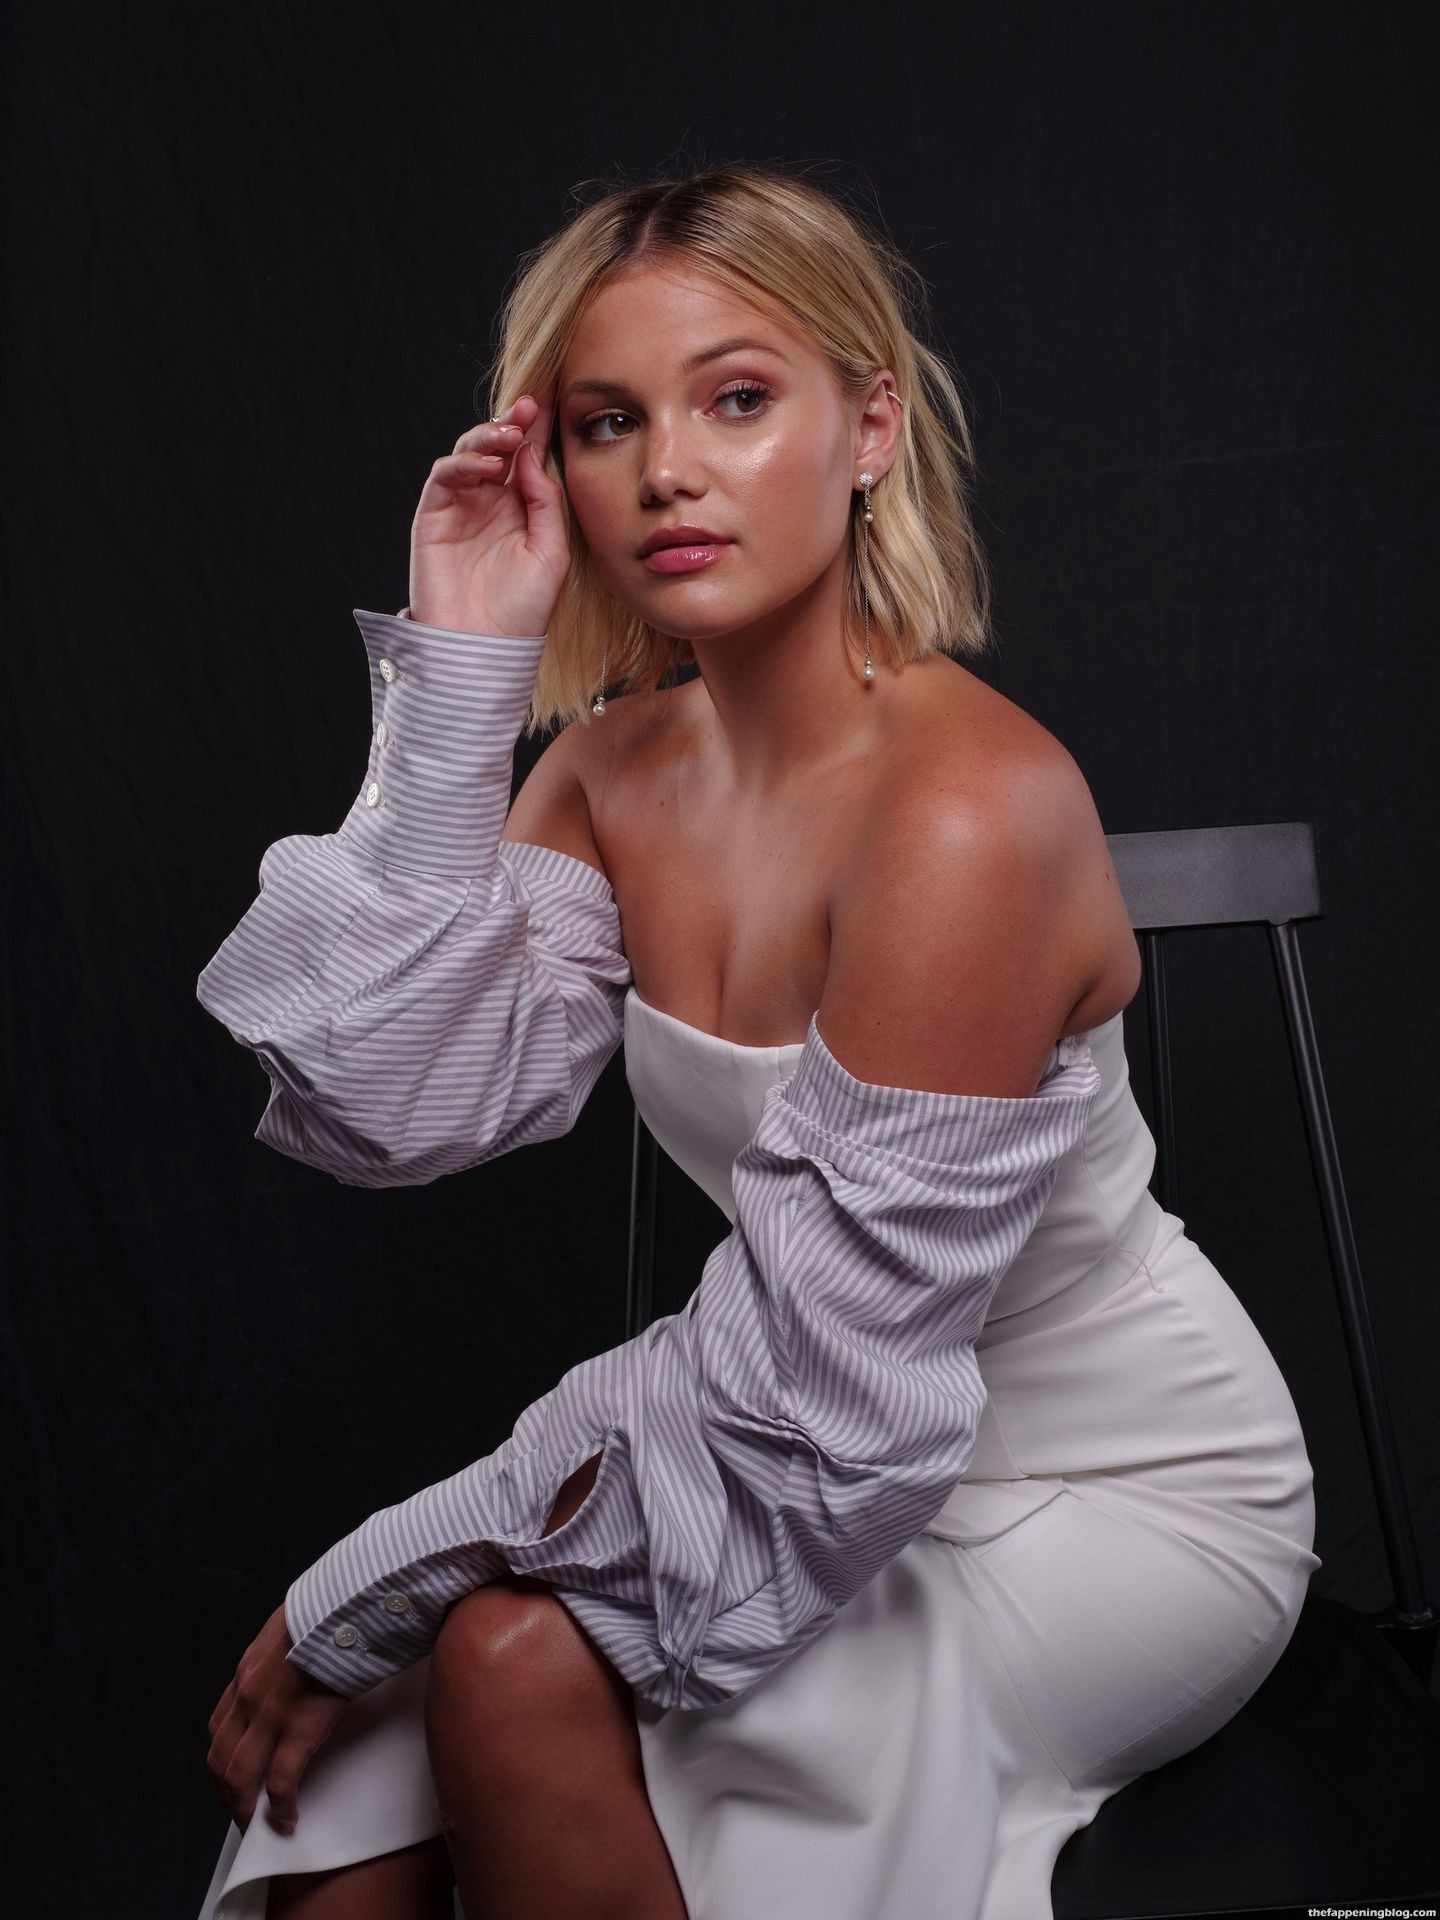 sexiest-photos-of-olivia-holt-that-you-never-seen-before-44-thefappeningblog.com1_.jpg